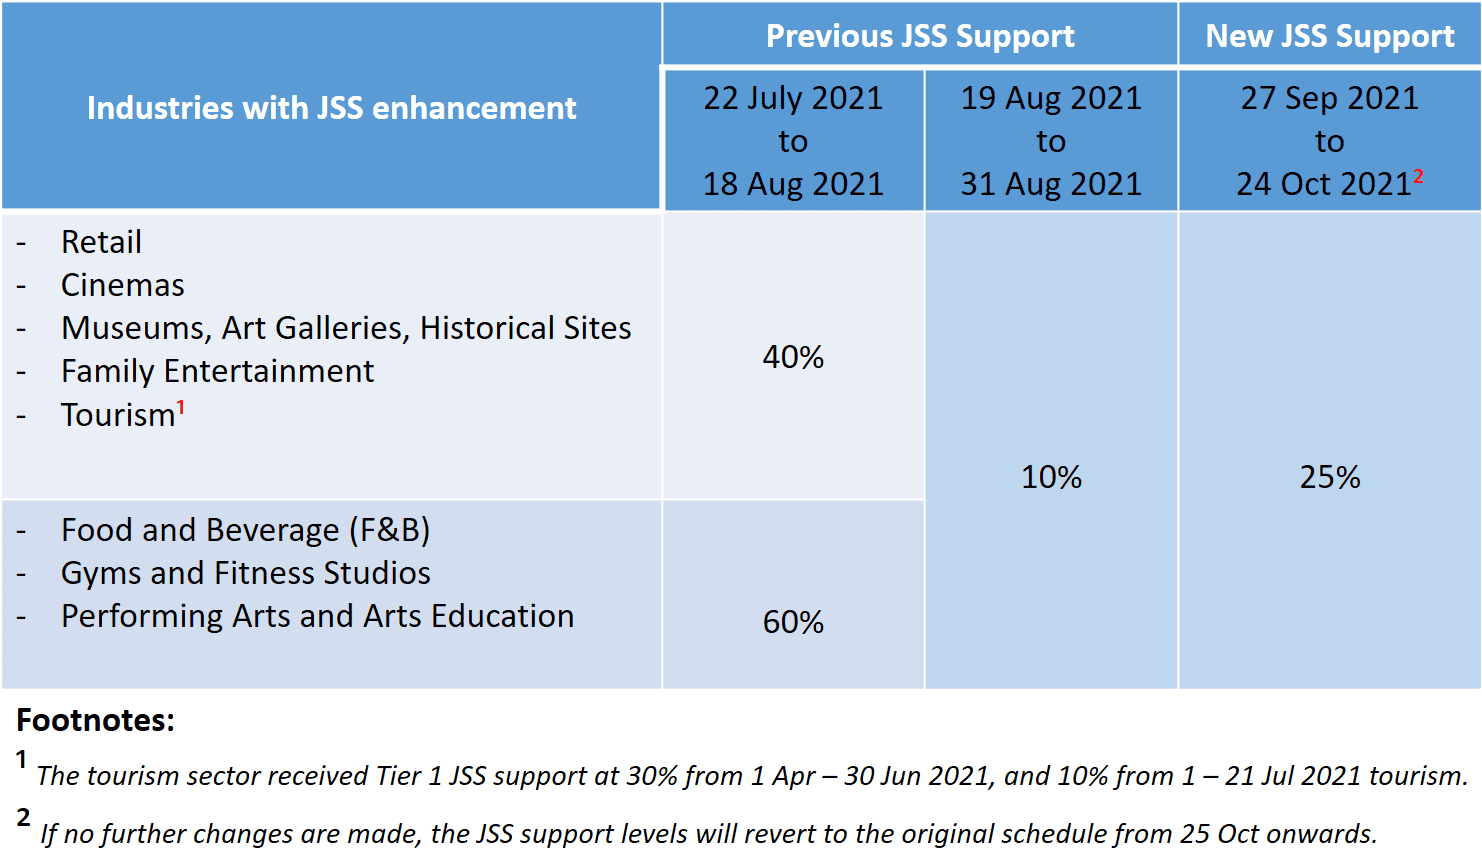 Table showing the differences between previous JSS Support and New JSS Support for difference industry